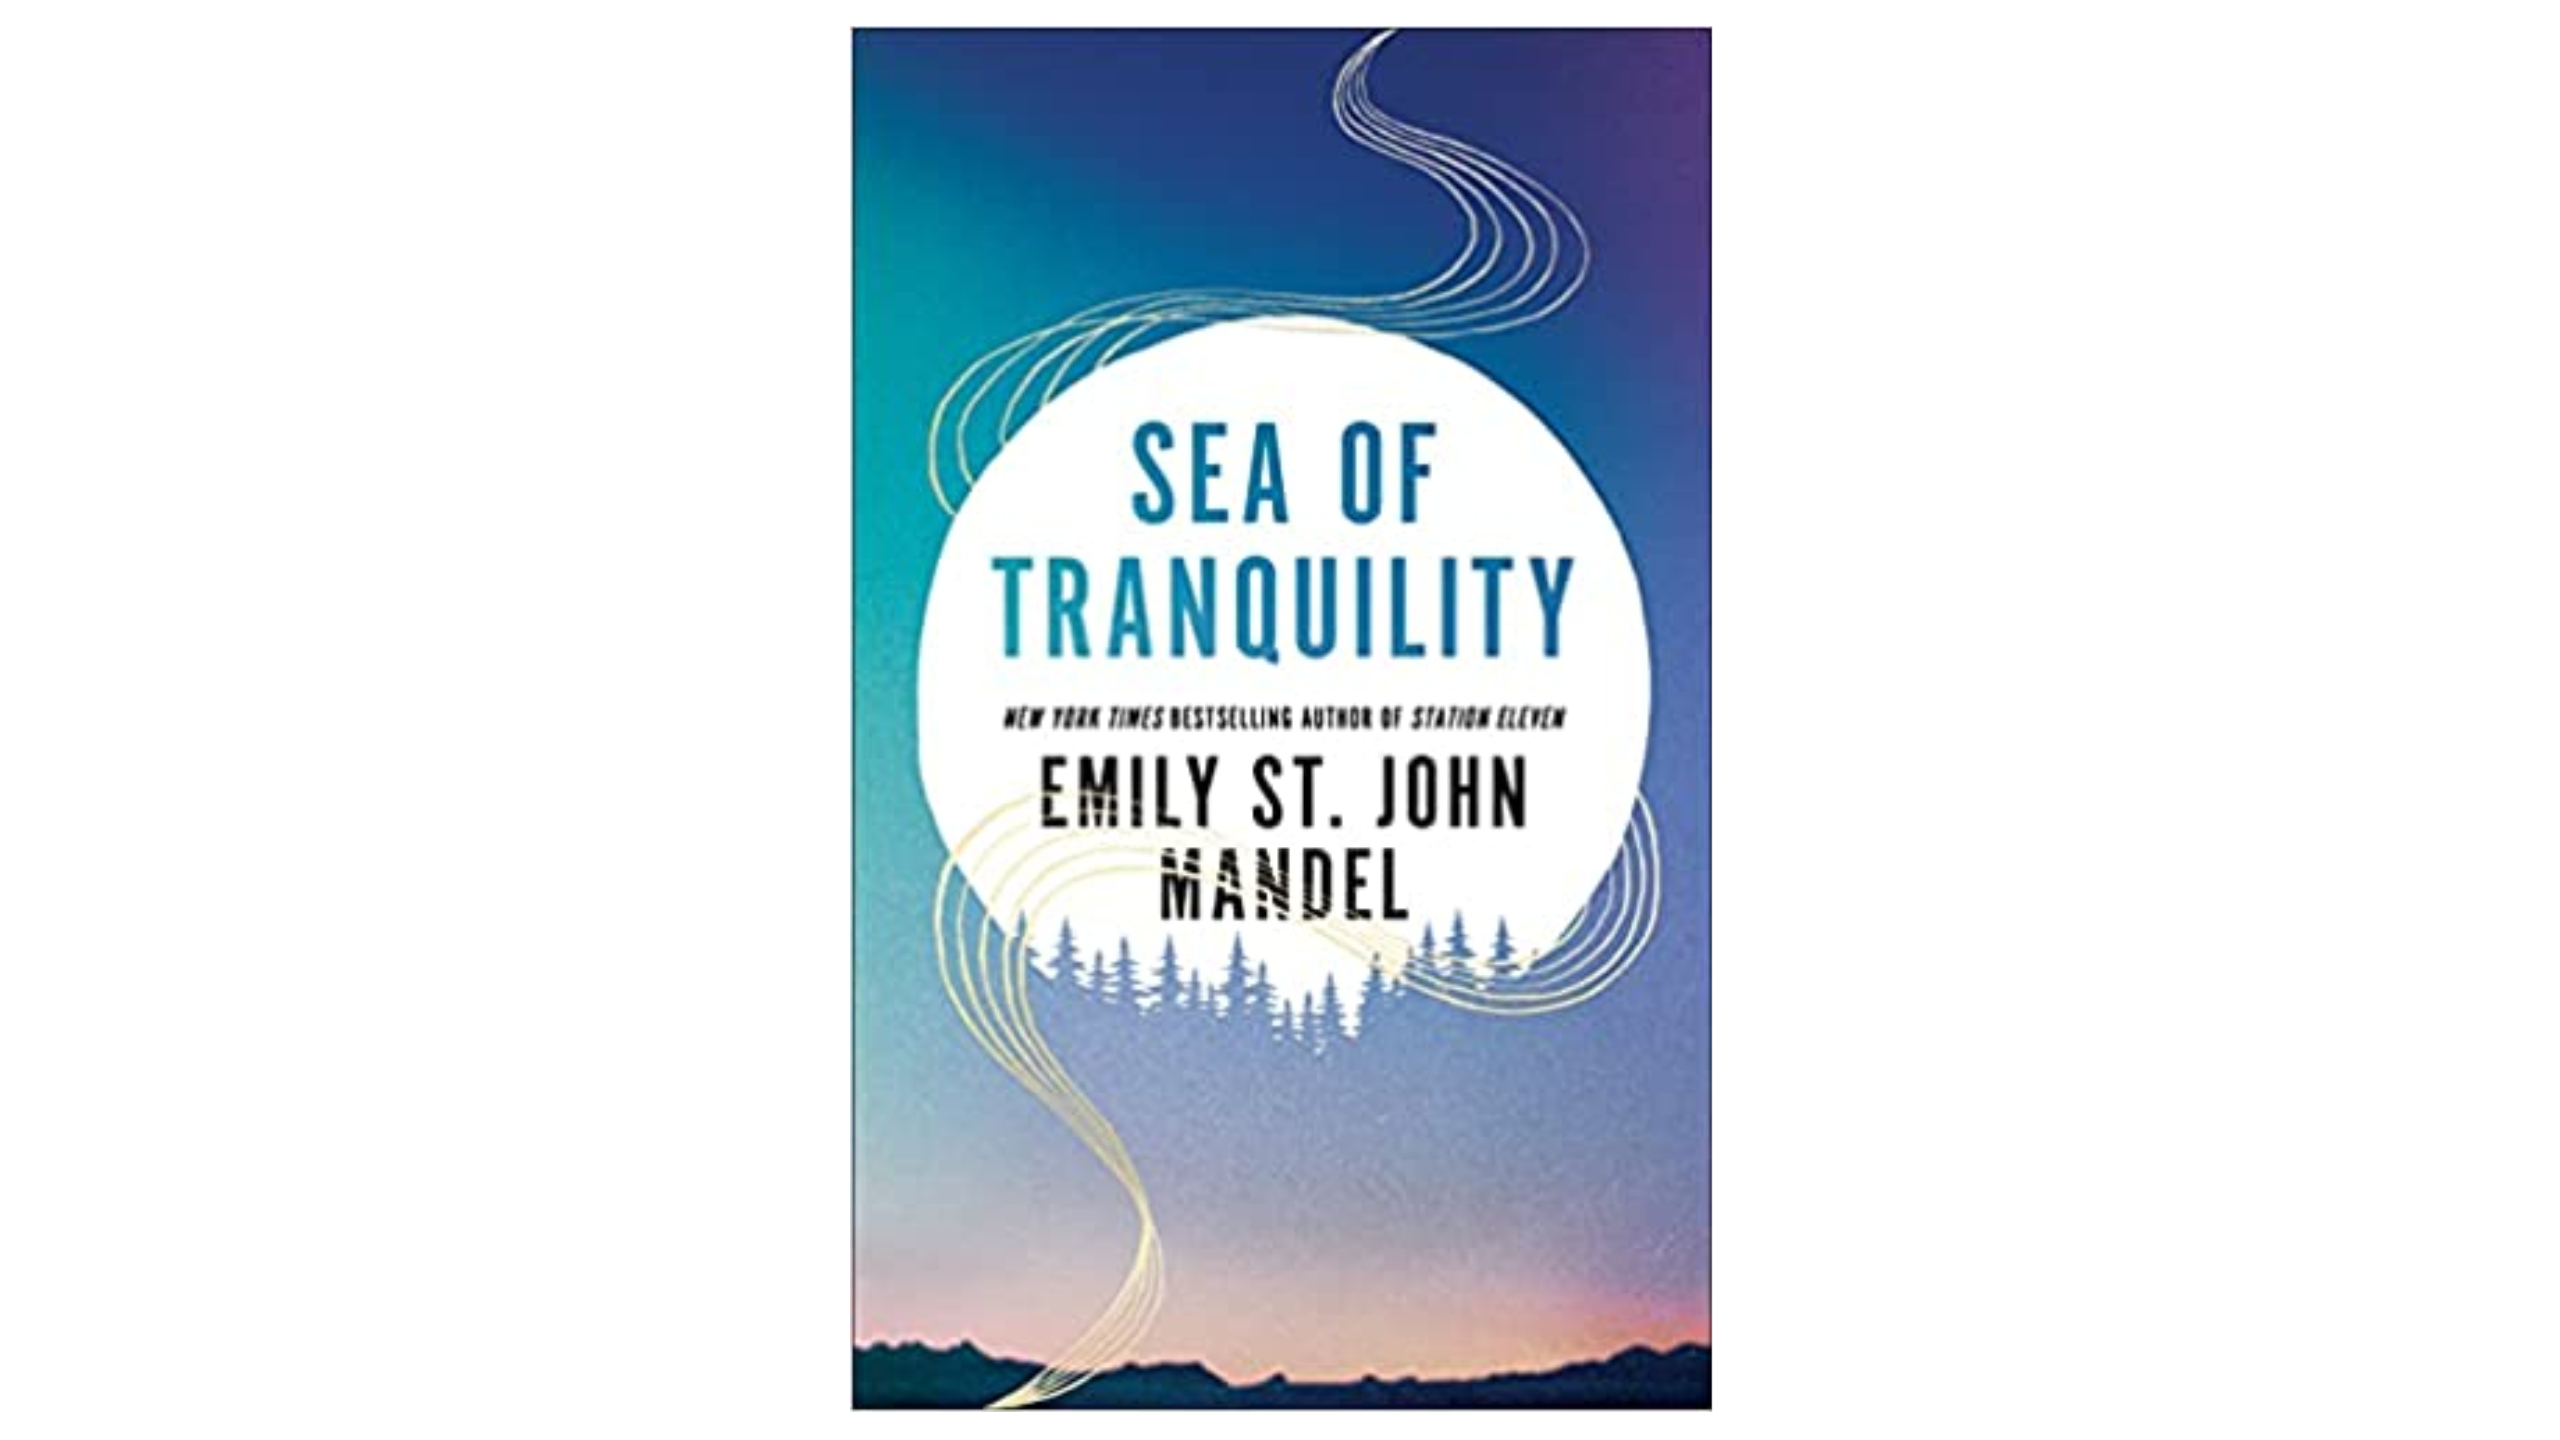 The book cover for Sea of Tranquility by Emily St John Mandel